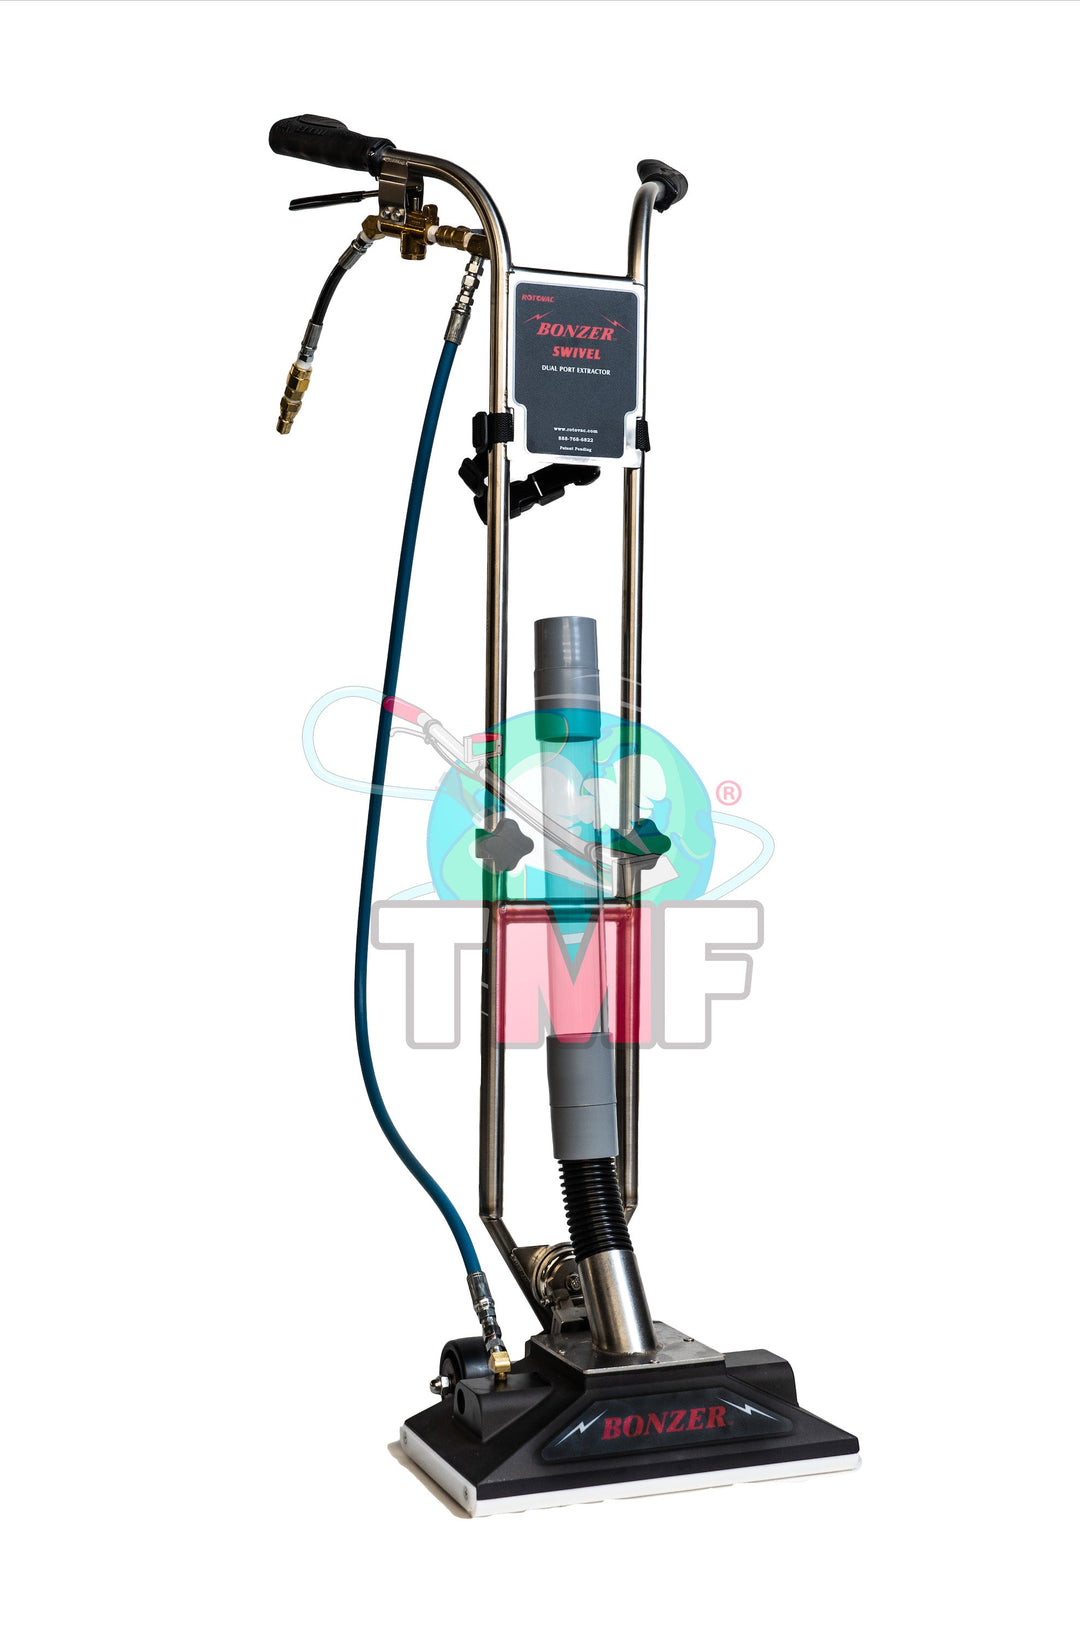 TMF Dually Heated Portable Extractor 800 PSI Tile, Carpet & Upholstery